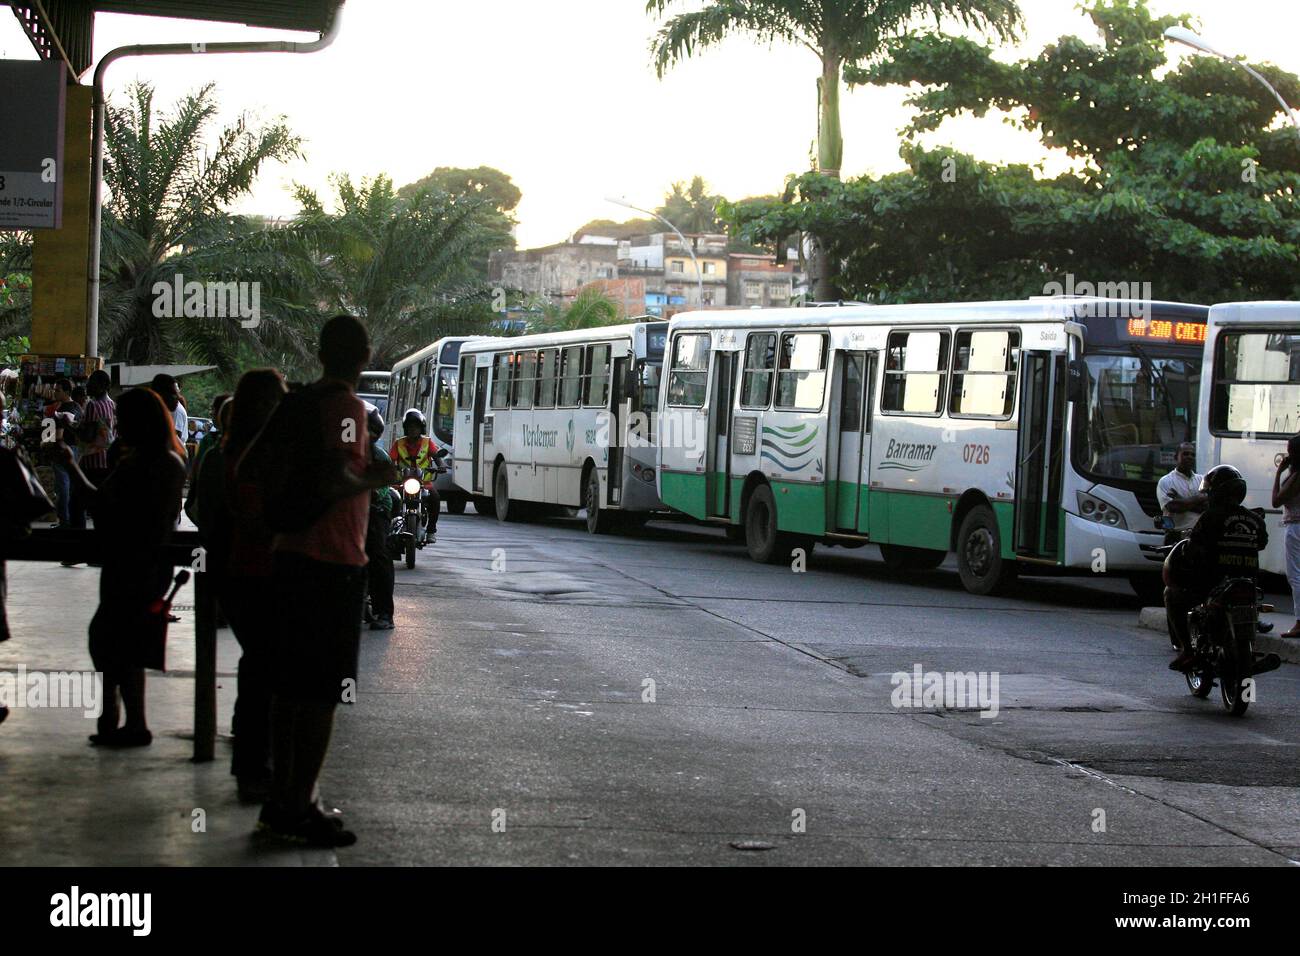 salvador, bahia / brazil - may 26, 2014: Queue of buses stopped near the entrance of Piraja Station in Salvador, is seen during public transport drive Stock Photo